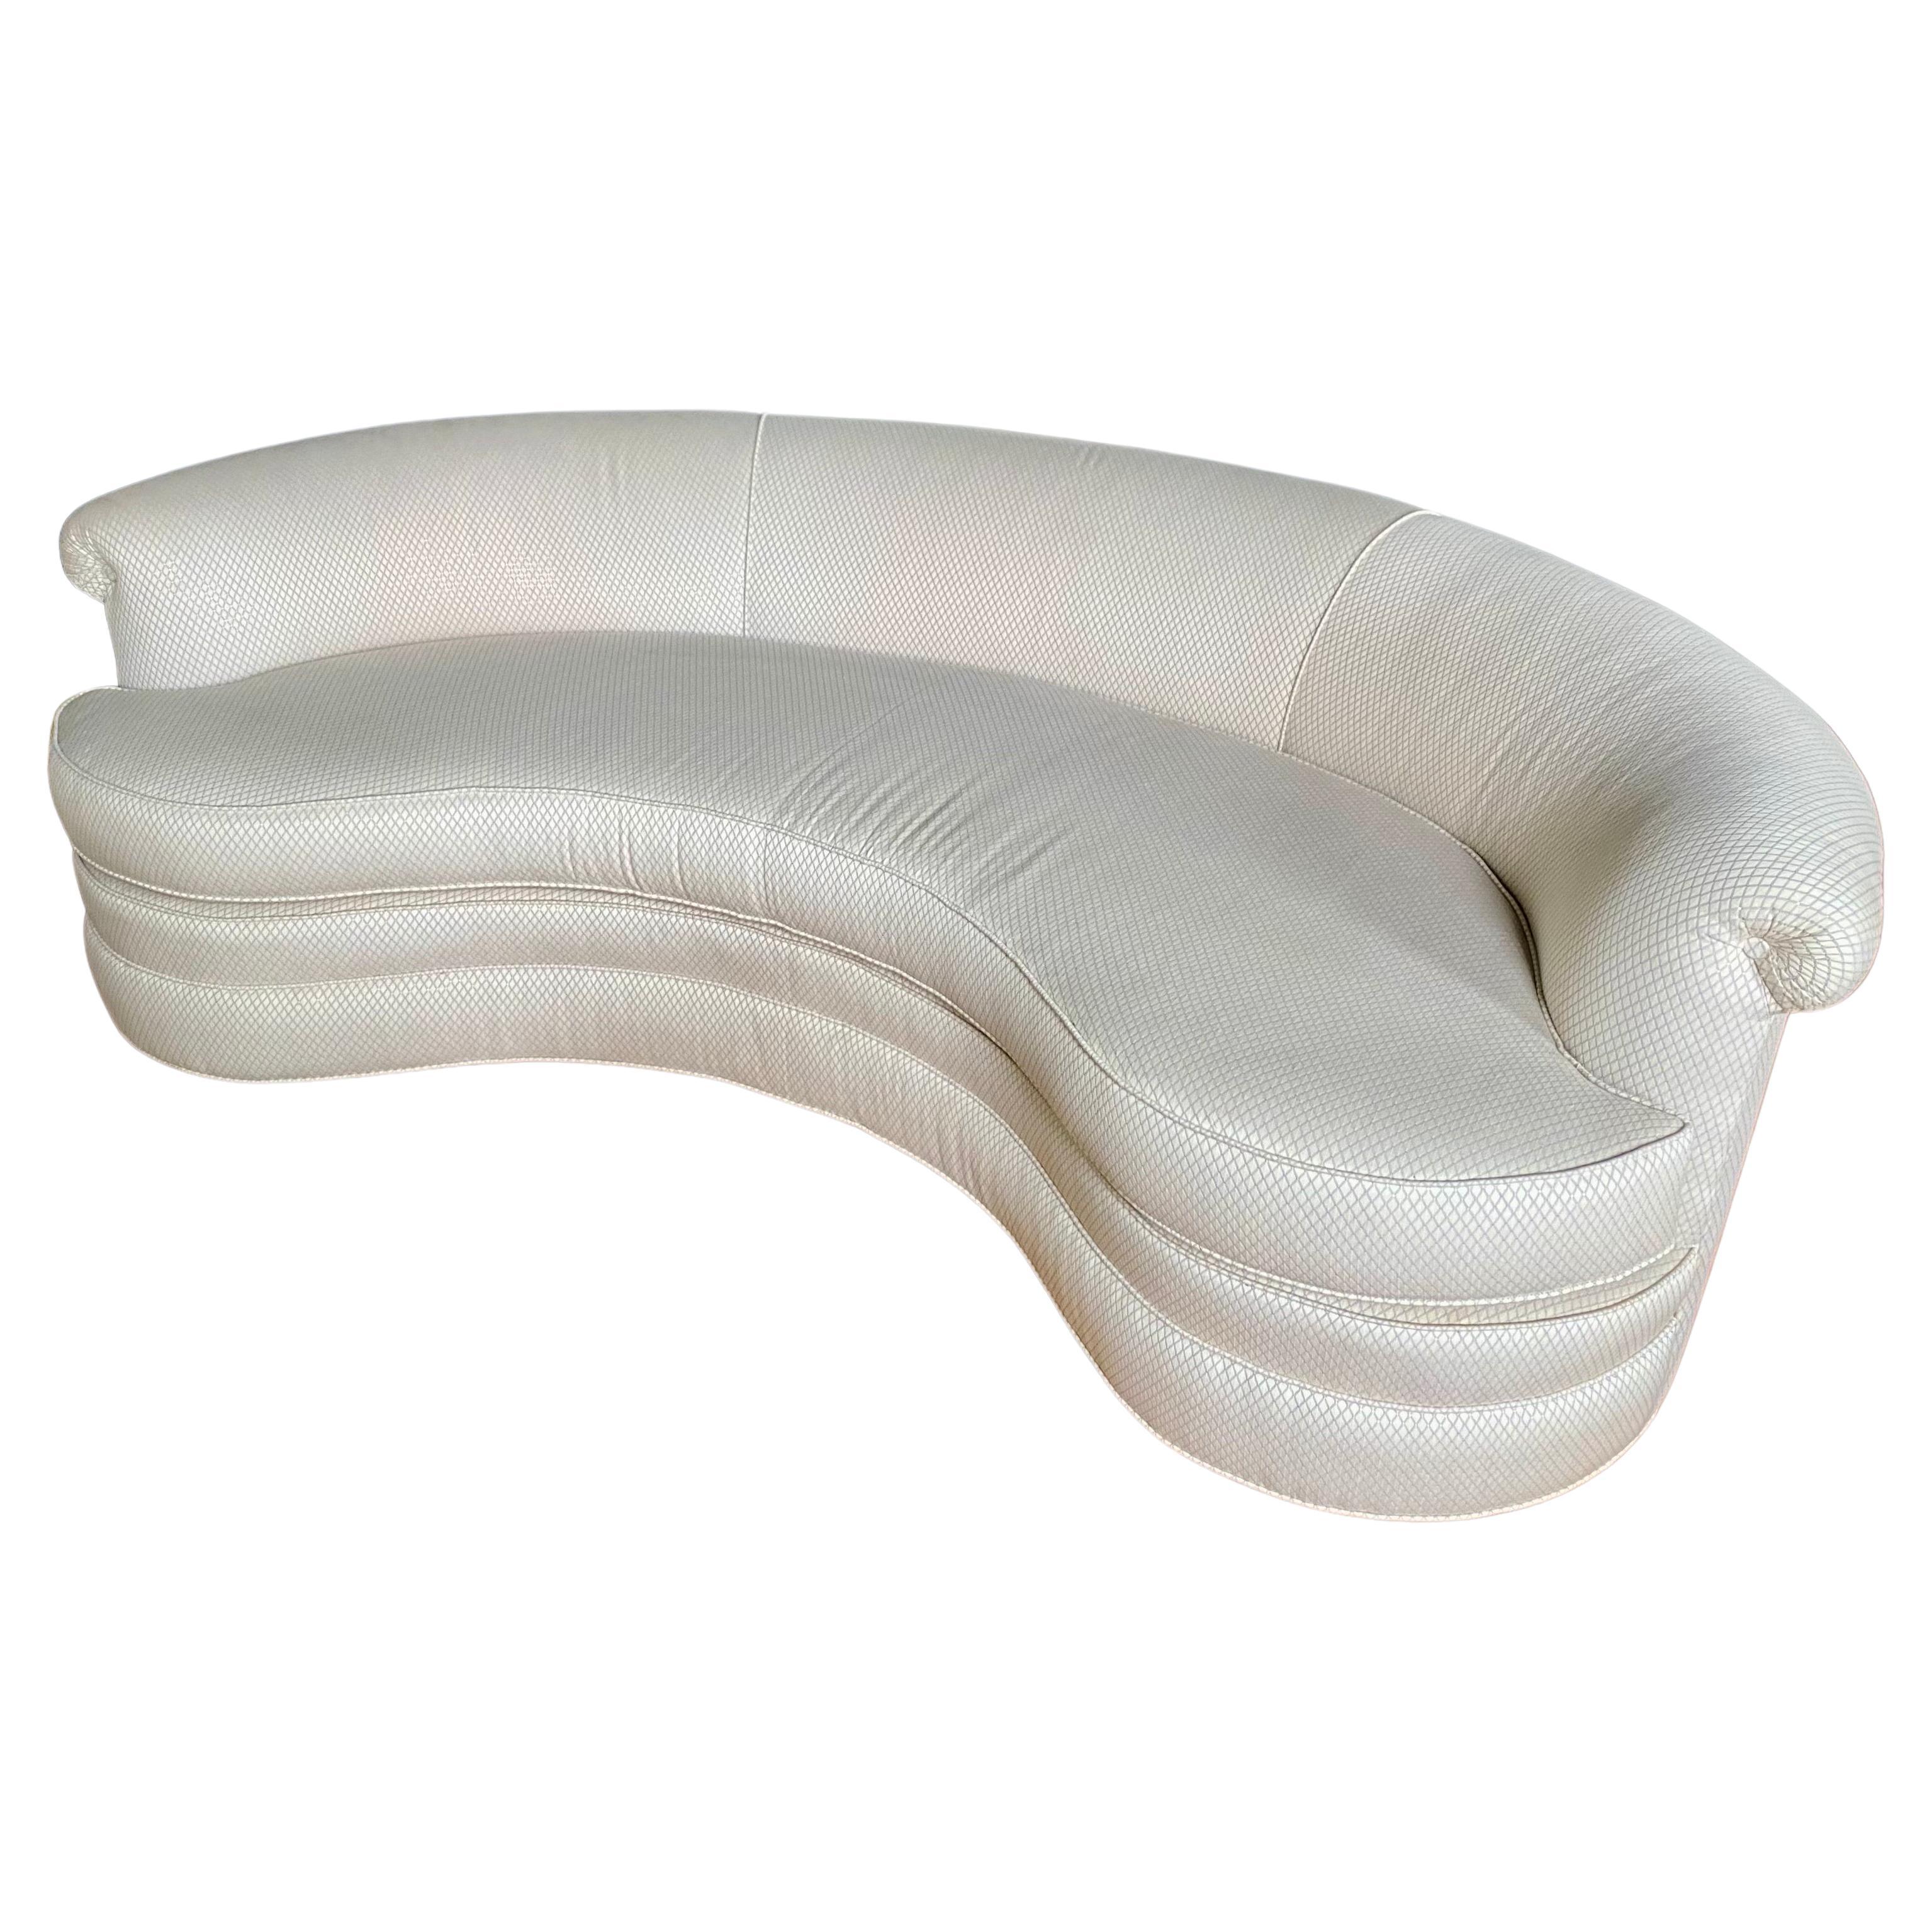 Mid-Century Modern Kidney Shaped Curved Serpentine Biomorphic Cloud Sofa In Good Condition For Sale In Lambertville, NJ